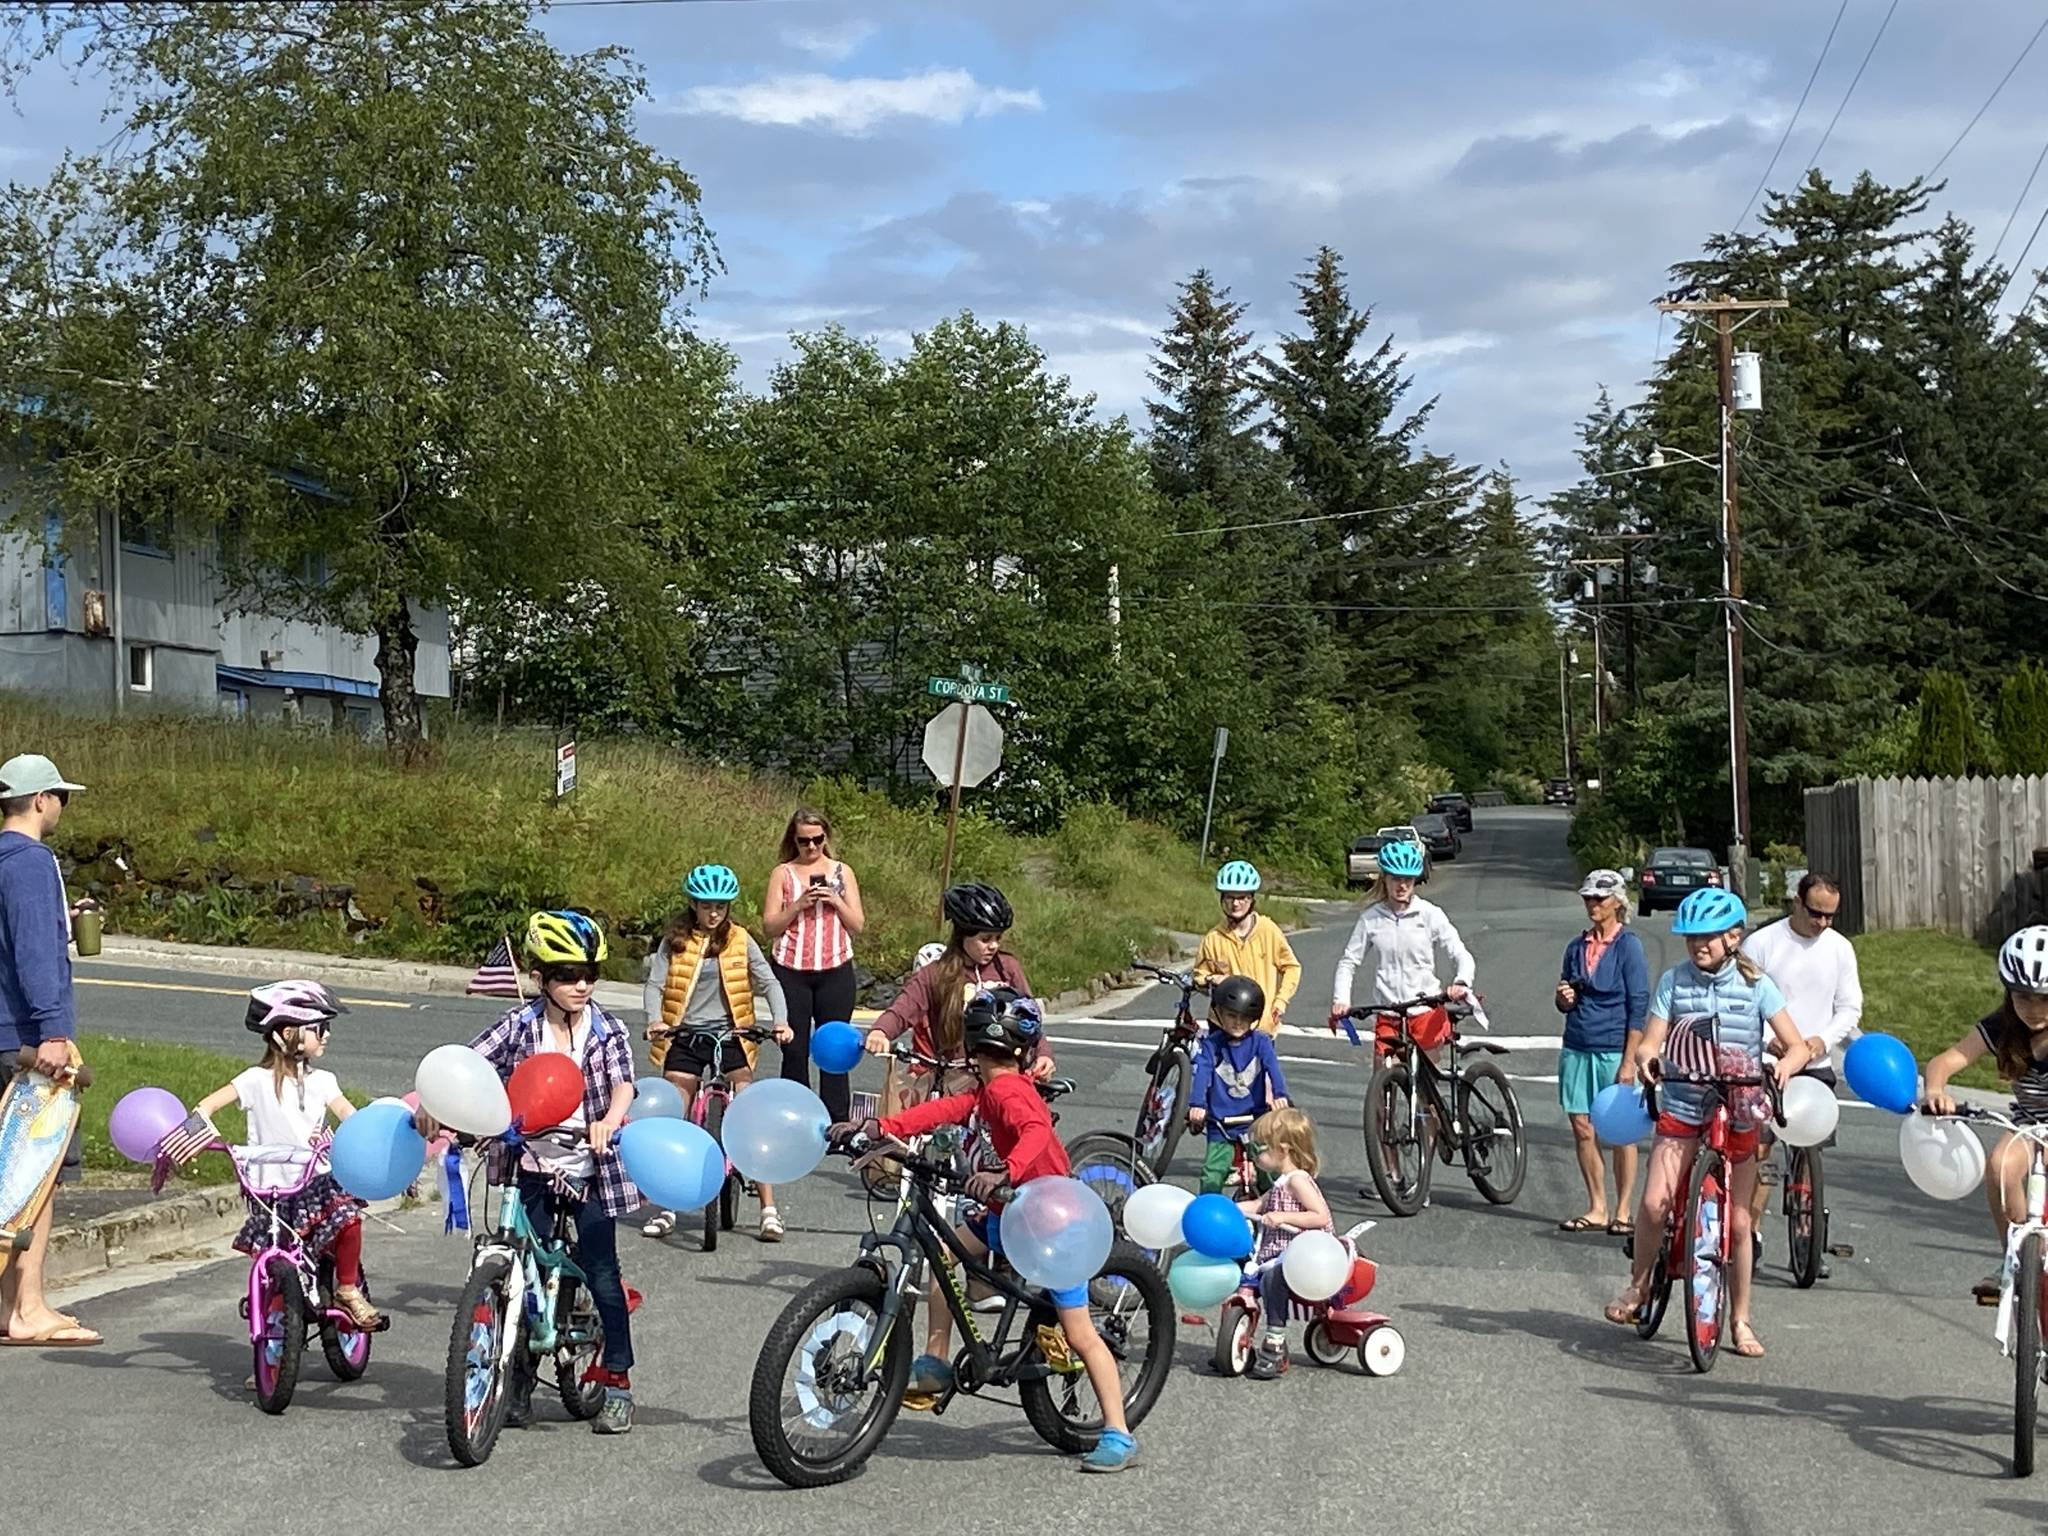 Kids of Nowell Avenue in West Juneau hold a bike parade Saturday morning. (Courtesy Photo | Greg Capito)